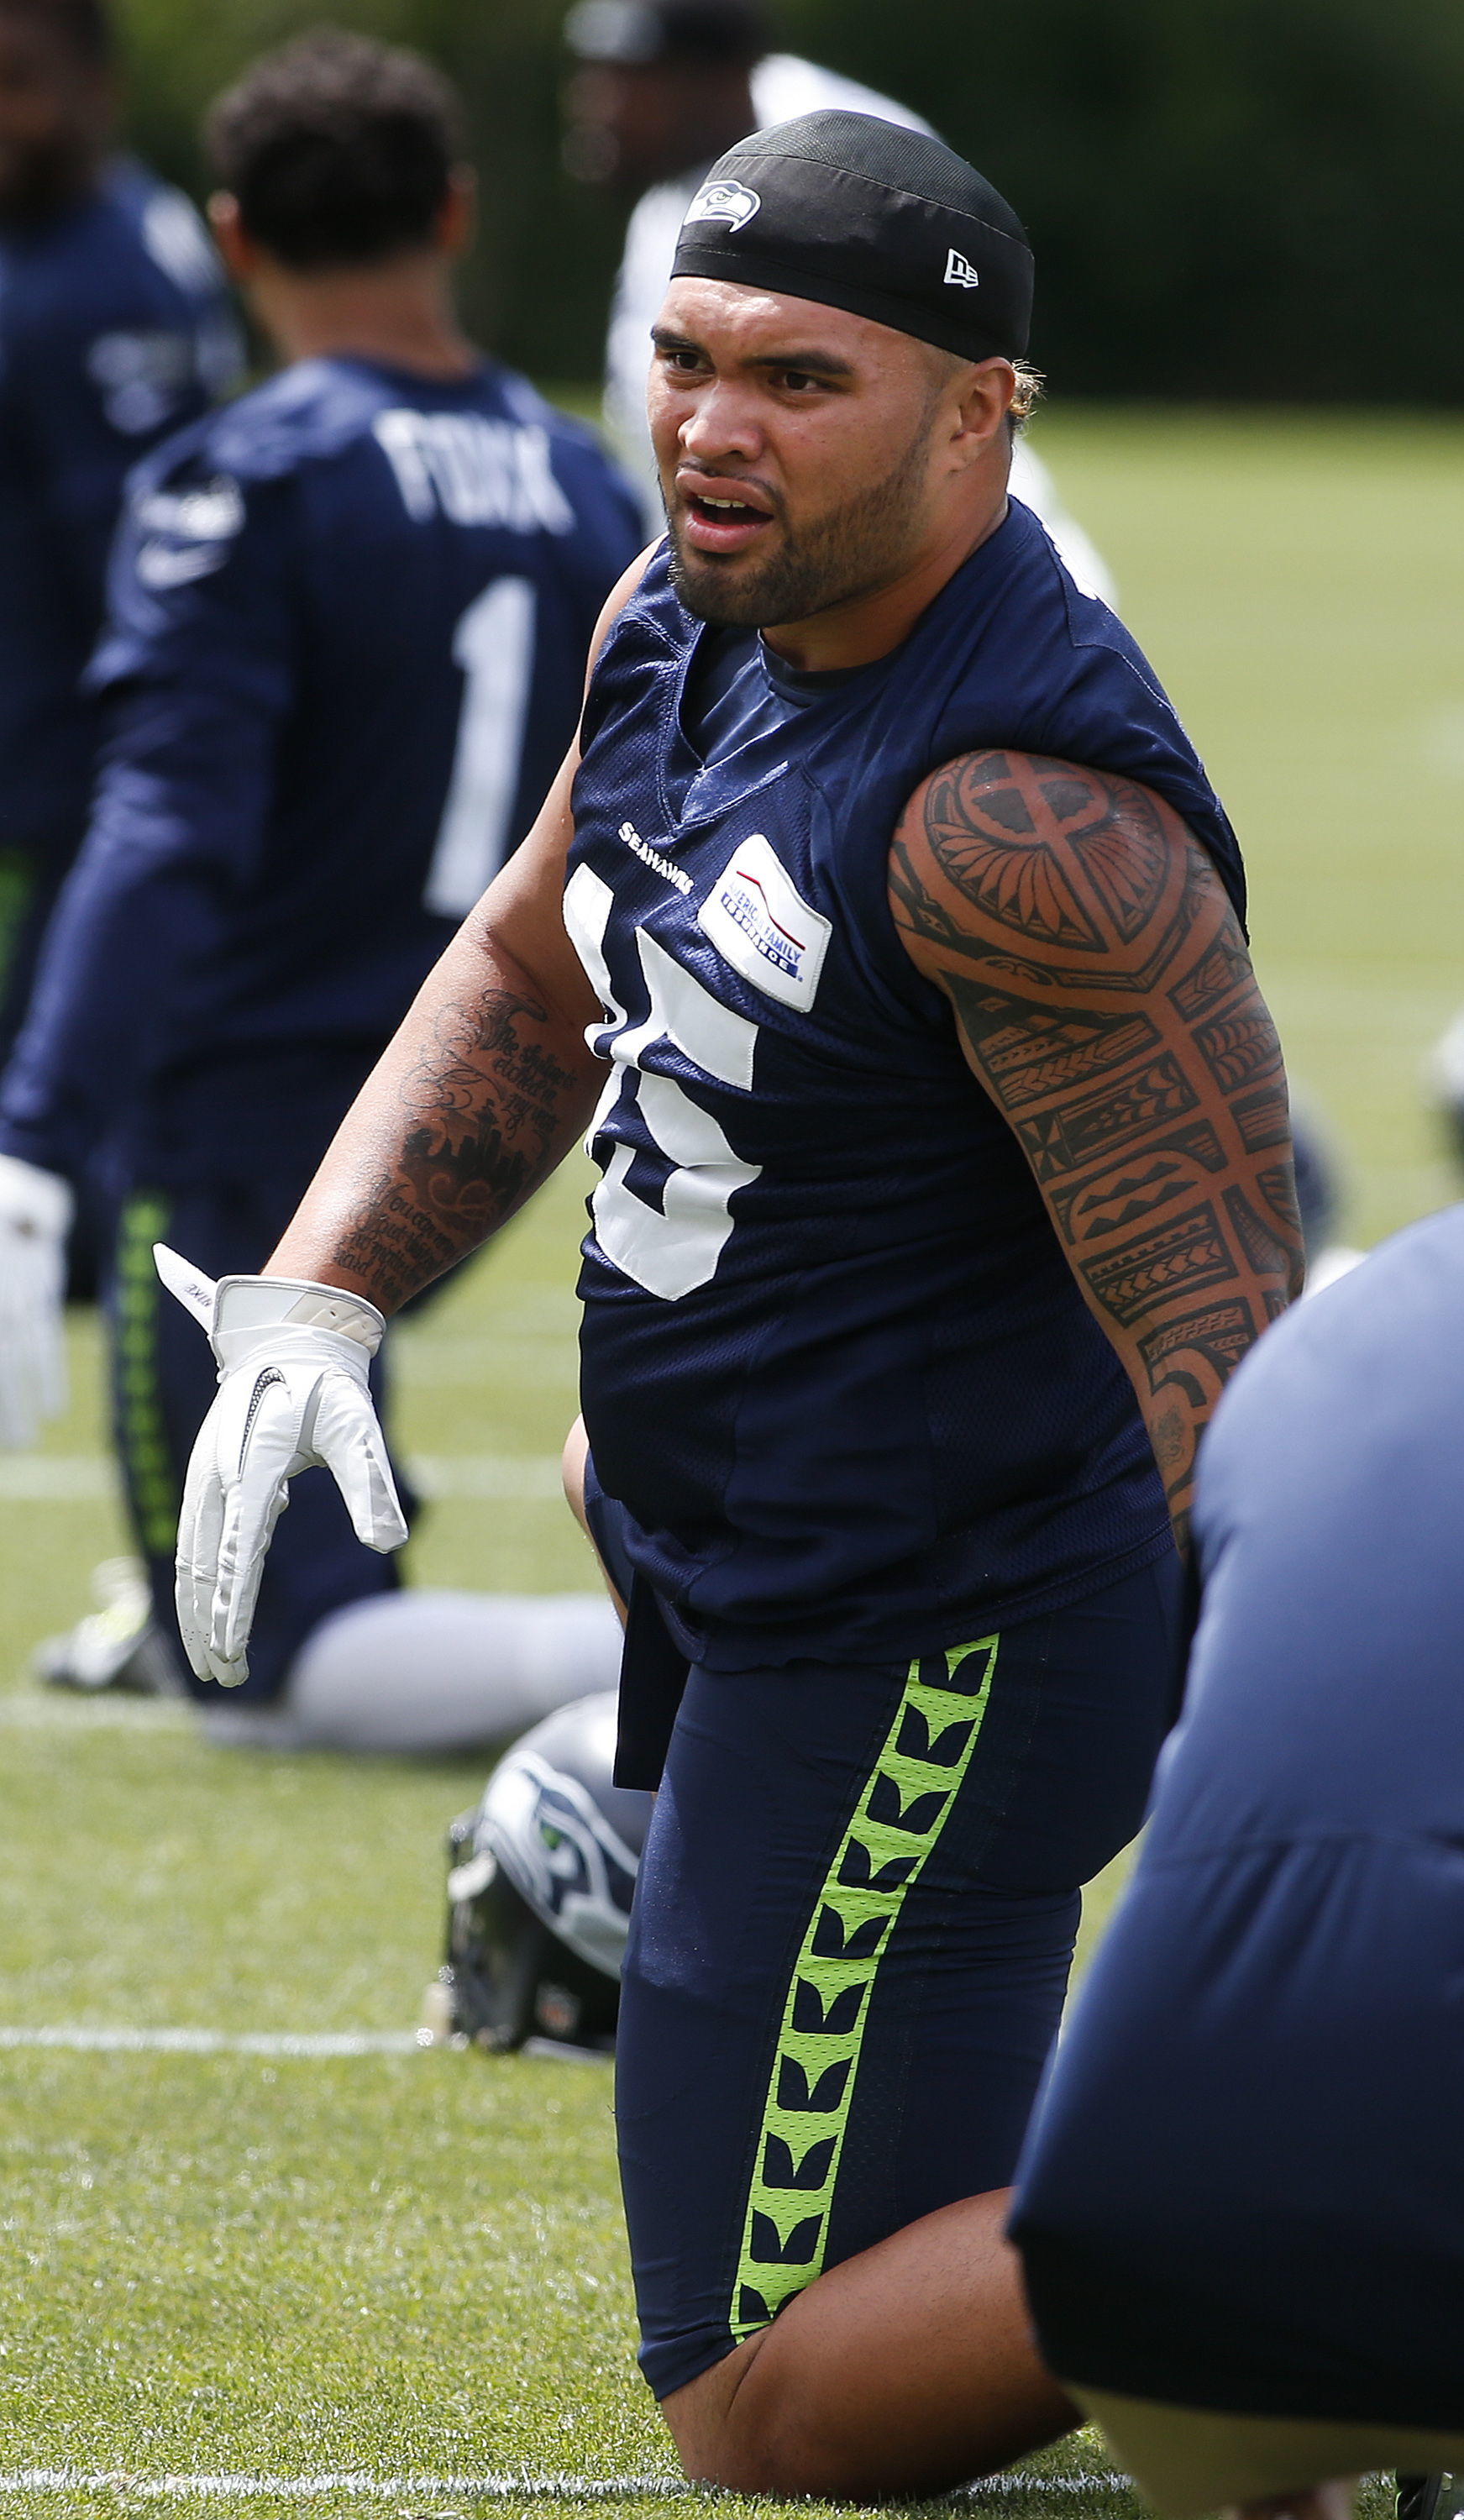 The Seahawks’ Taniela Tupou, an Archbishop Murphy alum, stretches during a minicamp practice June 14 at the Virginia Mason Athletic Center in Renton.